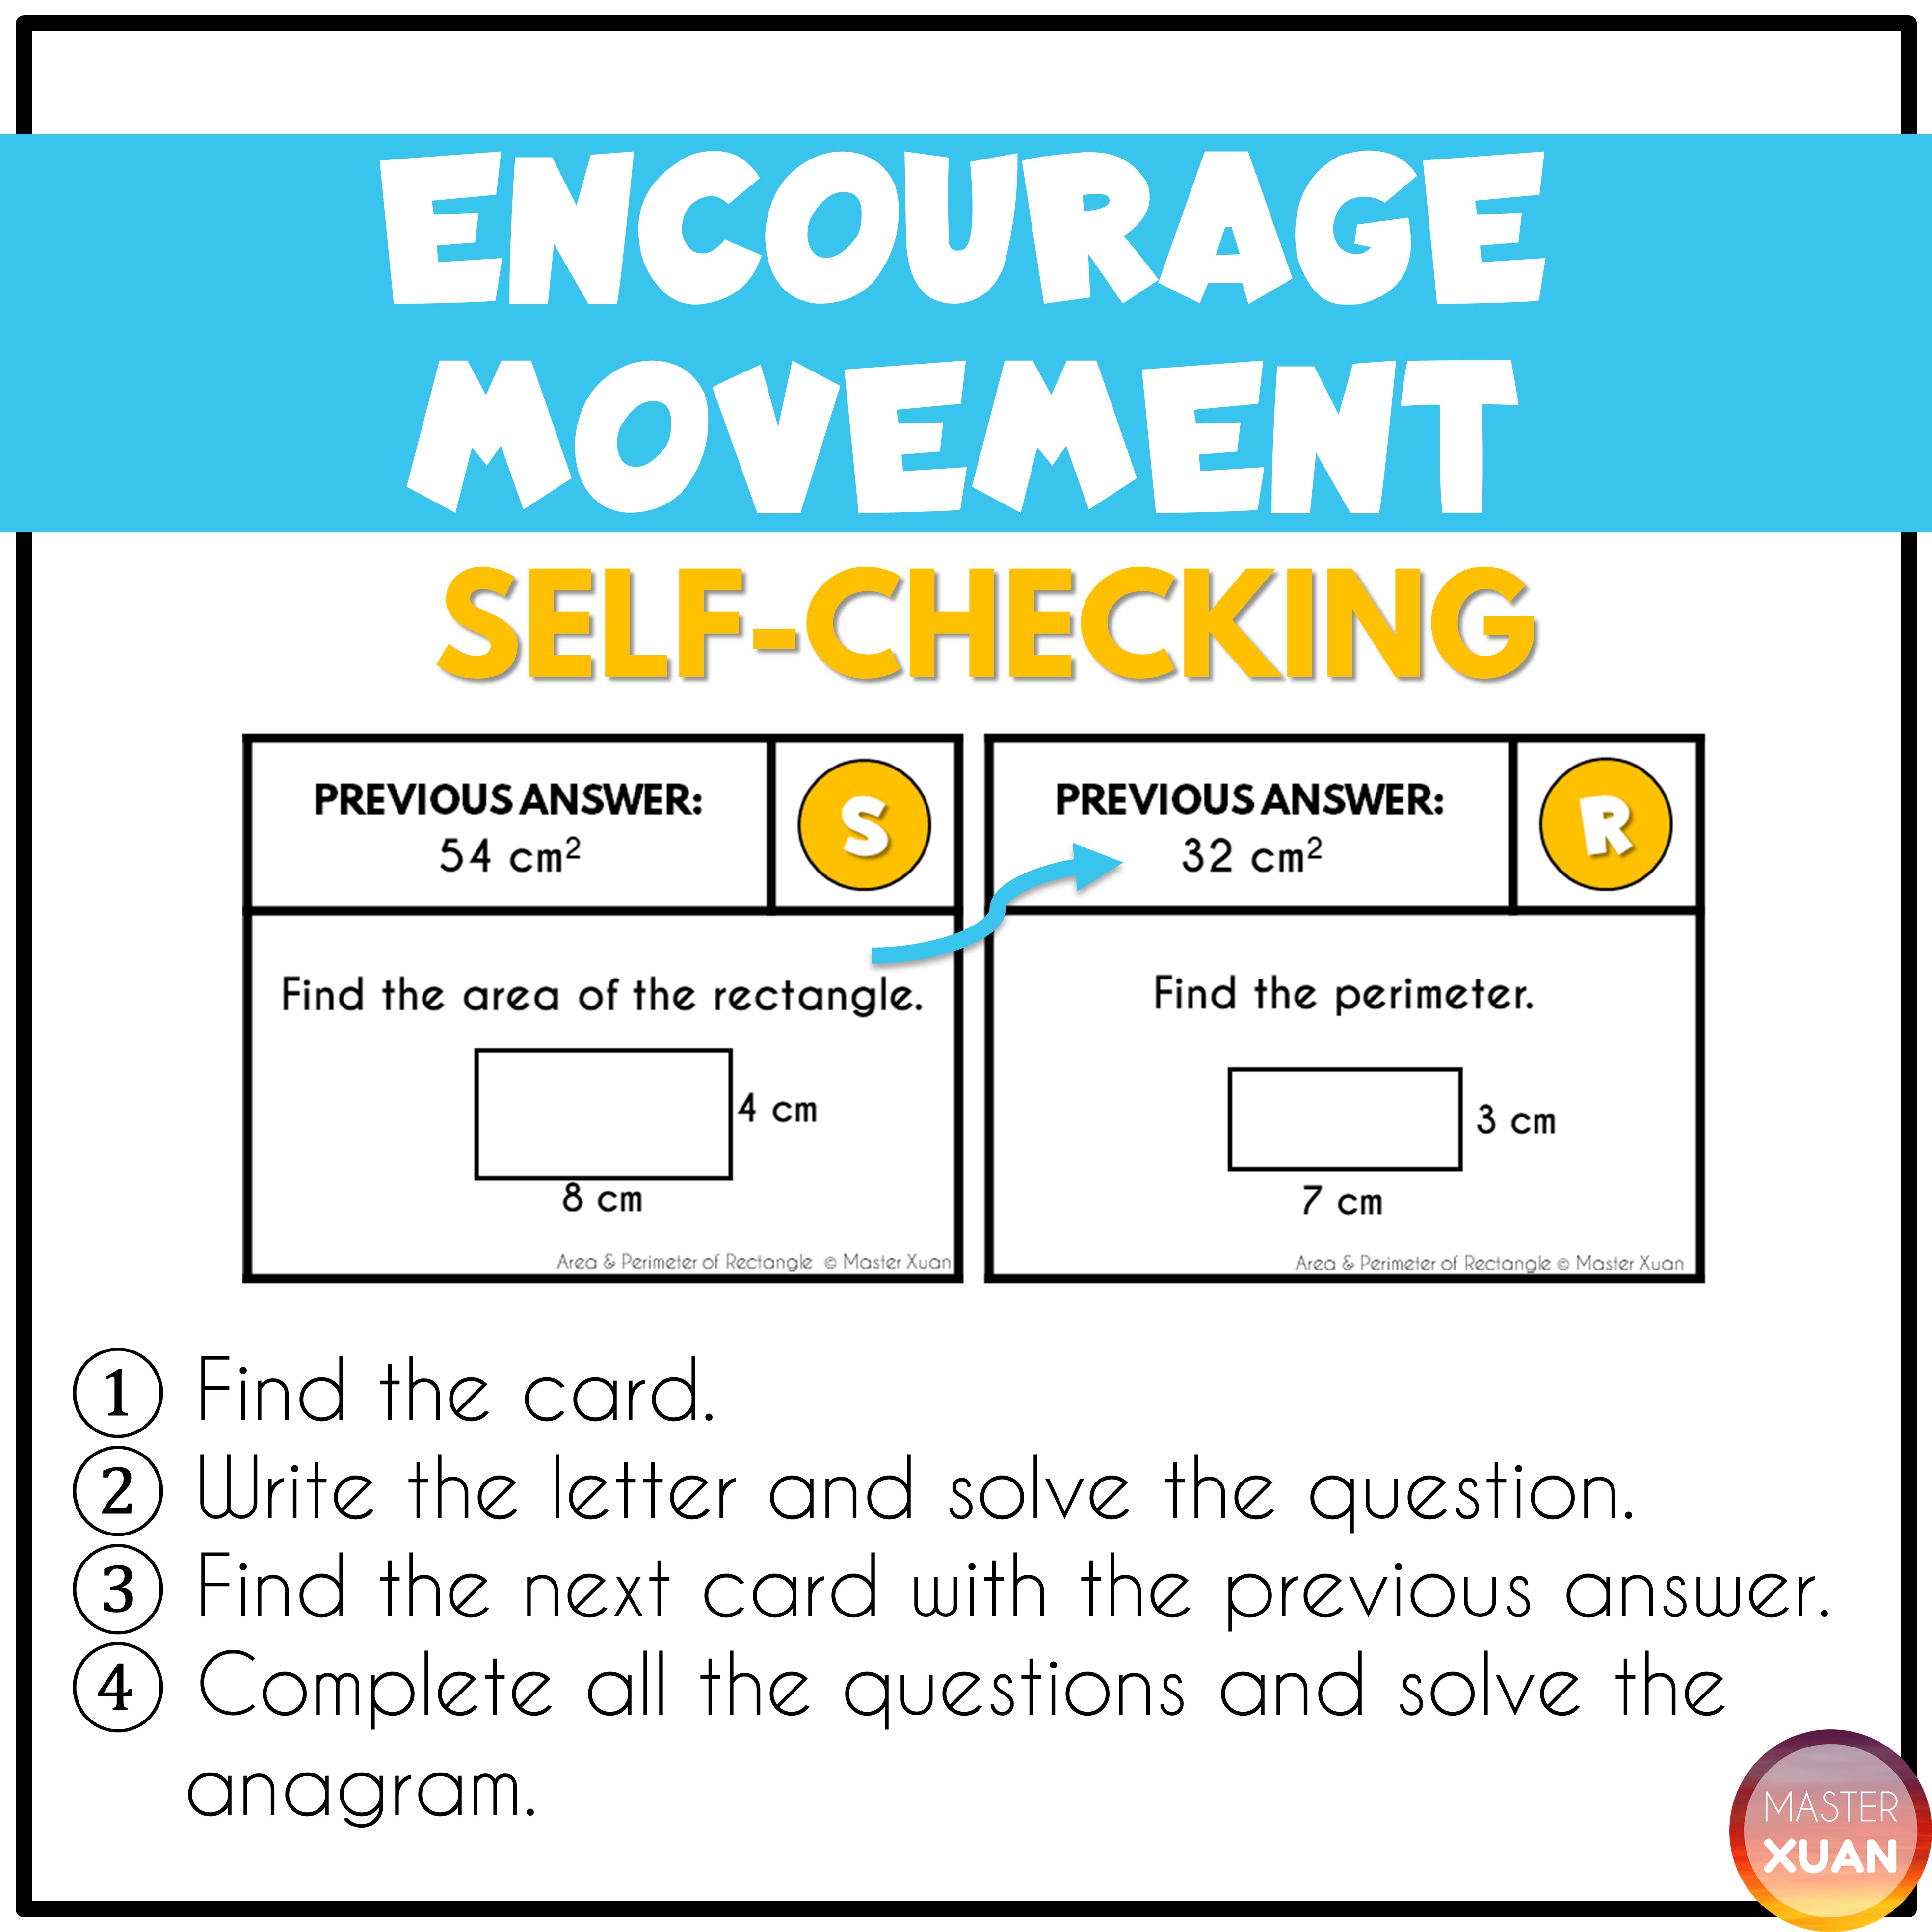 Area and perimeter scavenger hunt enncourage movement and is self-checking.